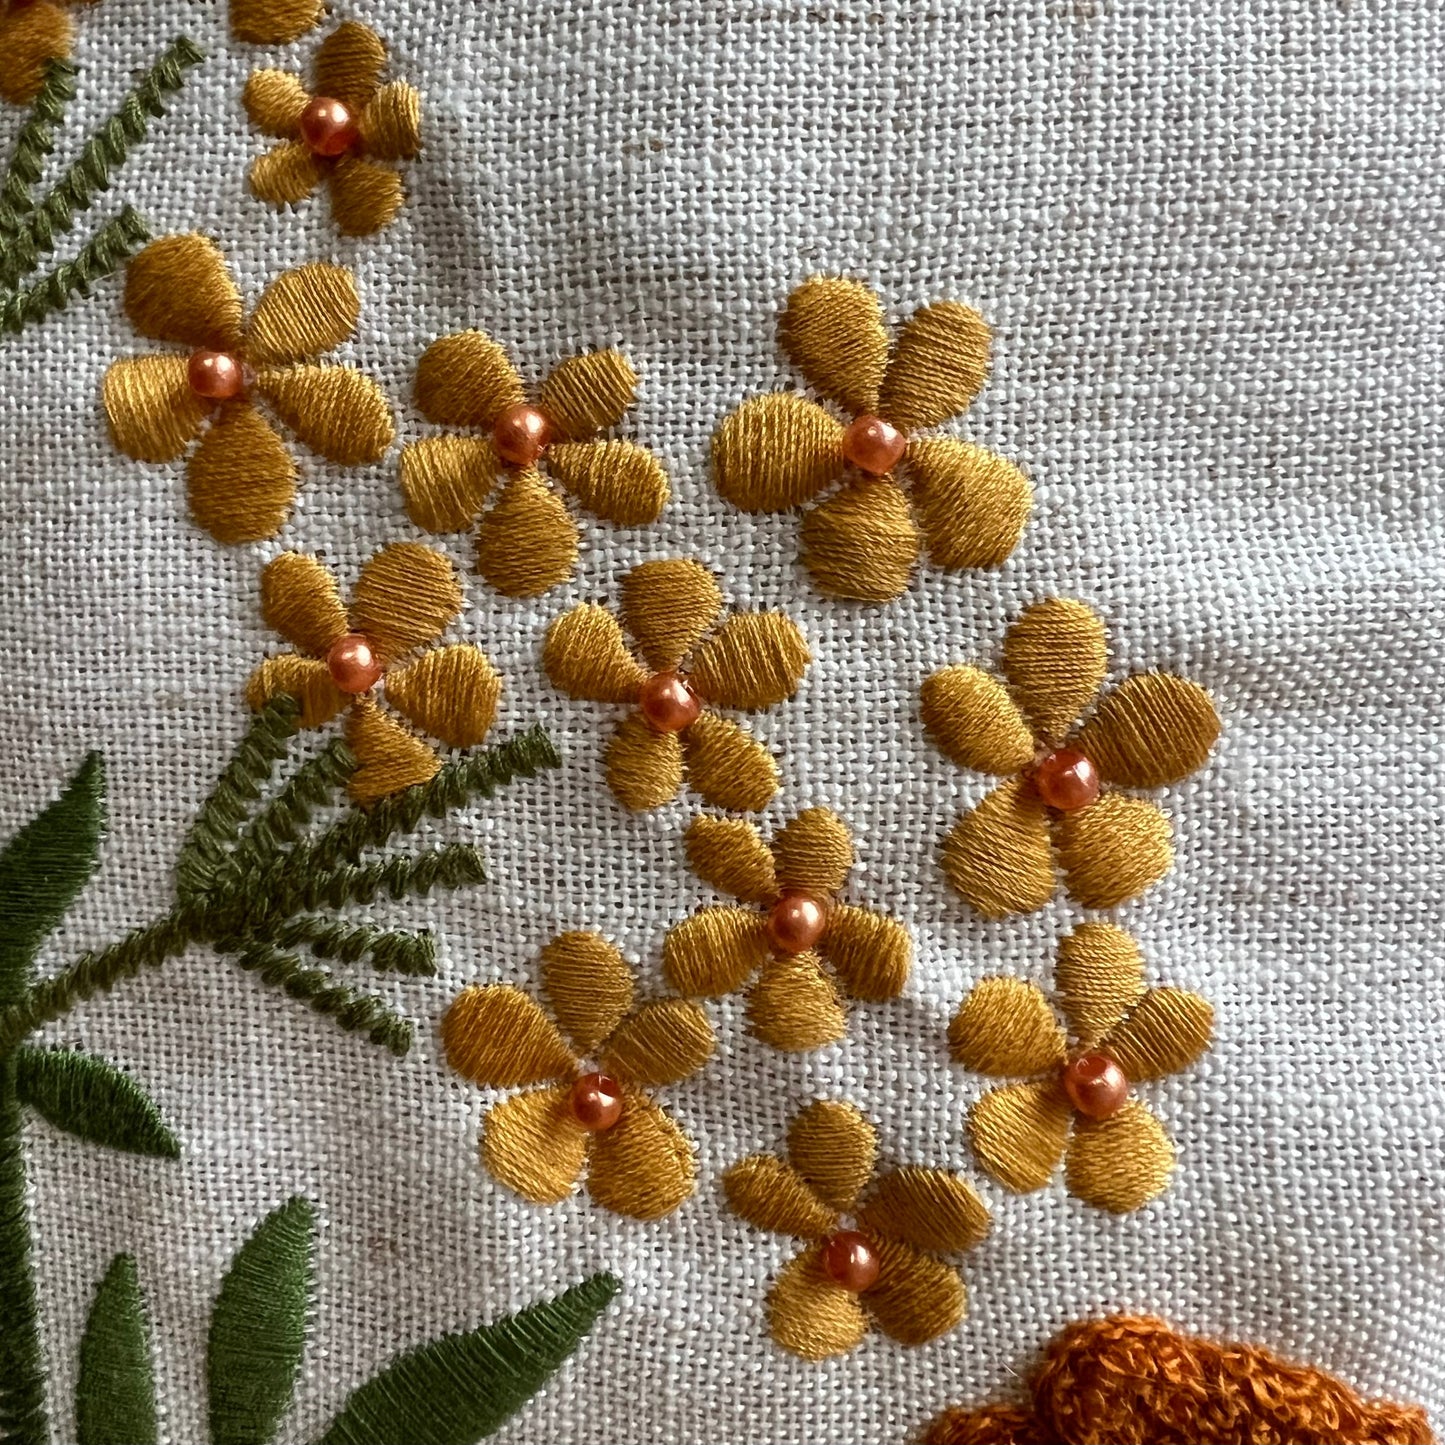 Wildflower Embroidered Pillow Cover